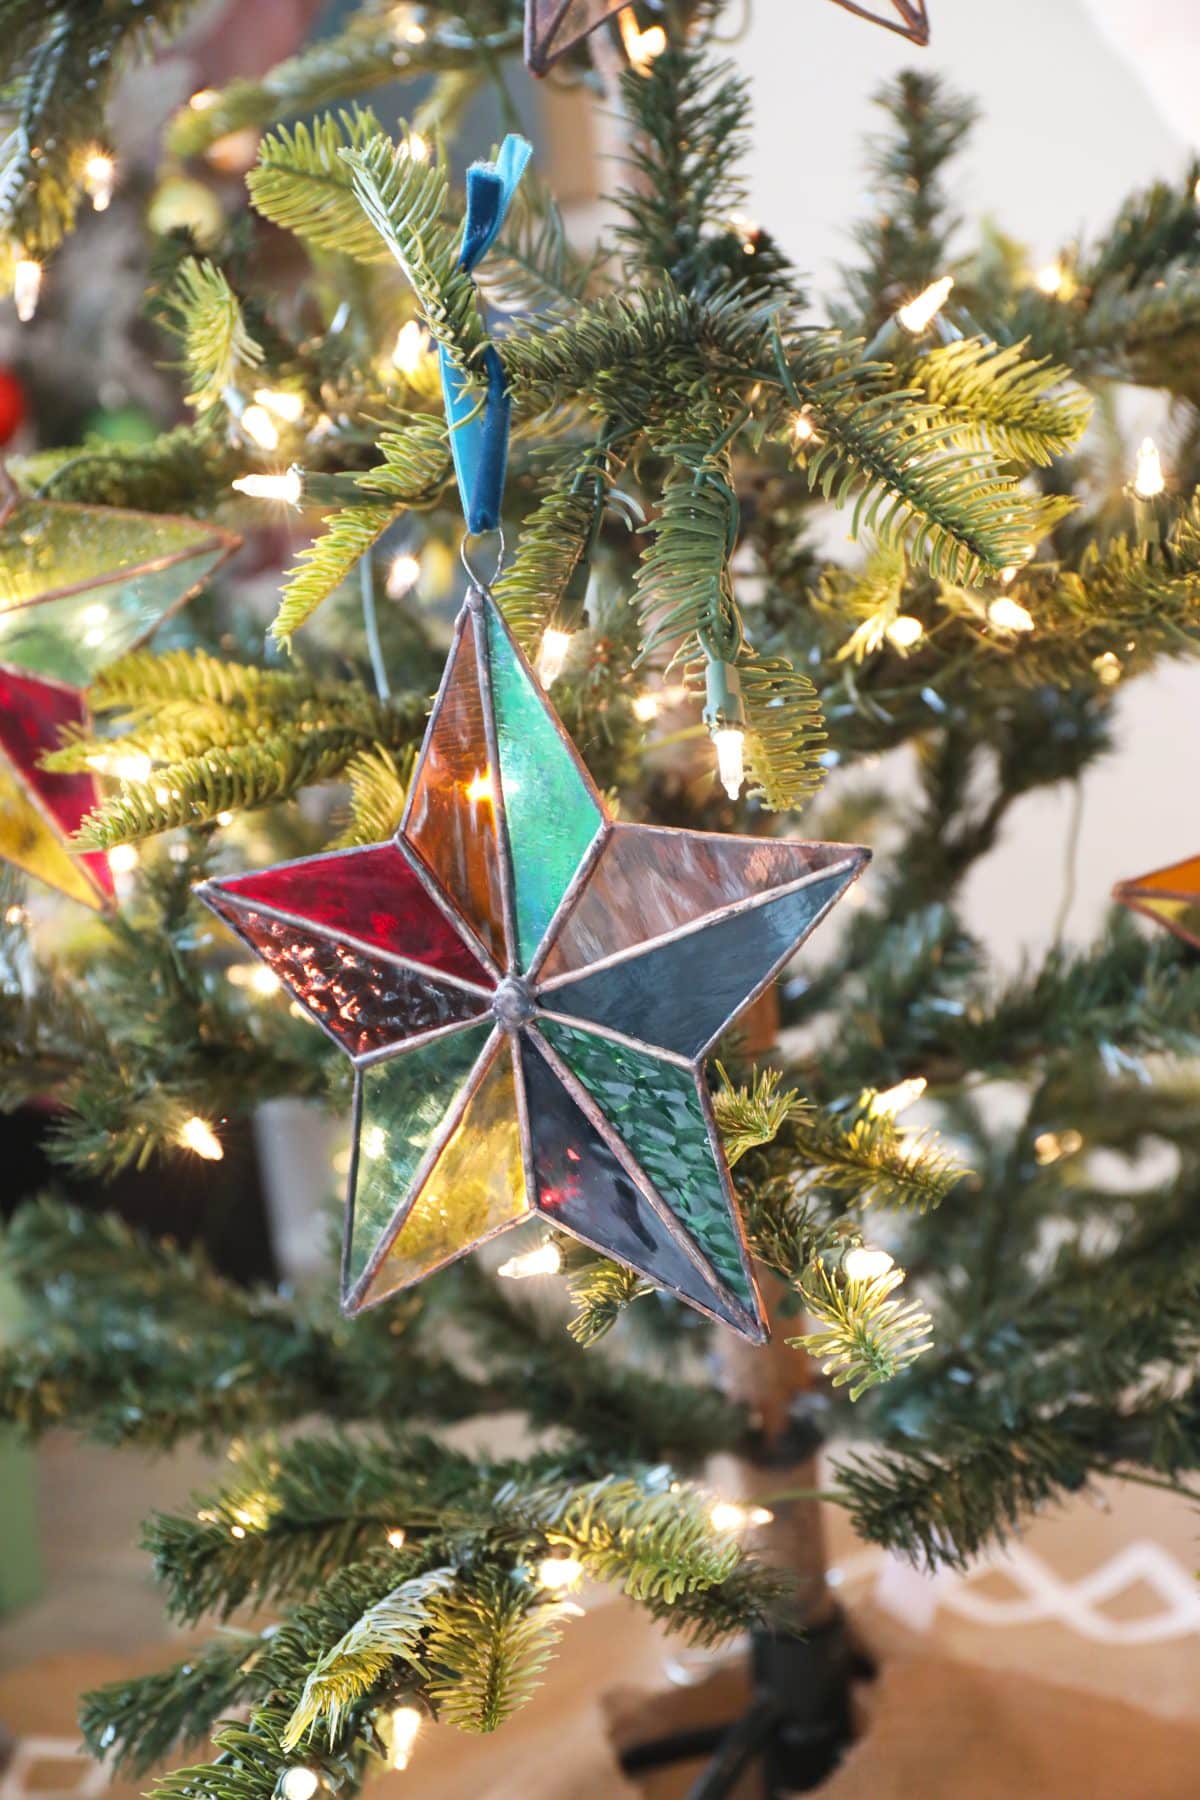 Handmade stained glass star ornaments